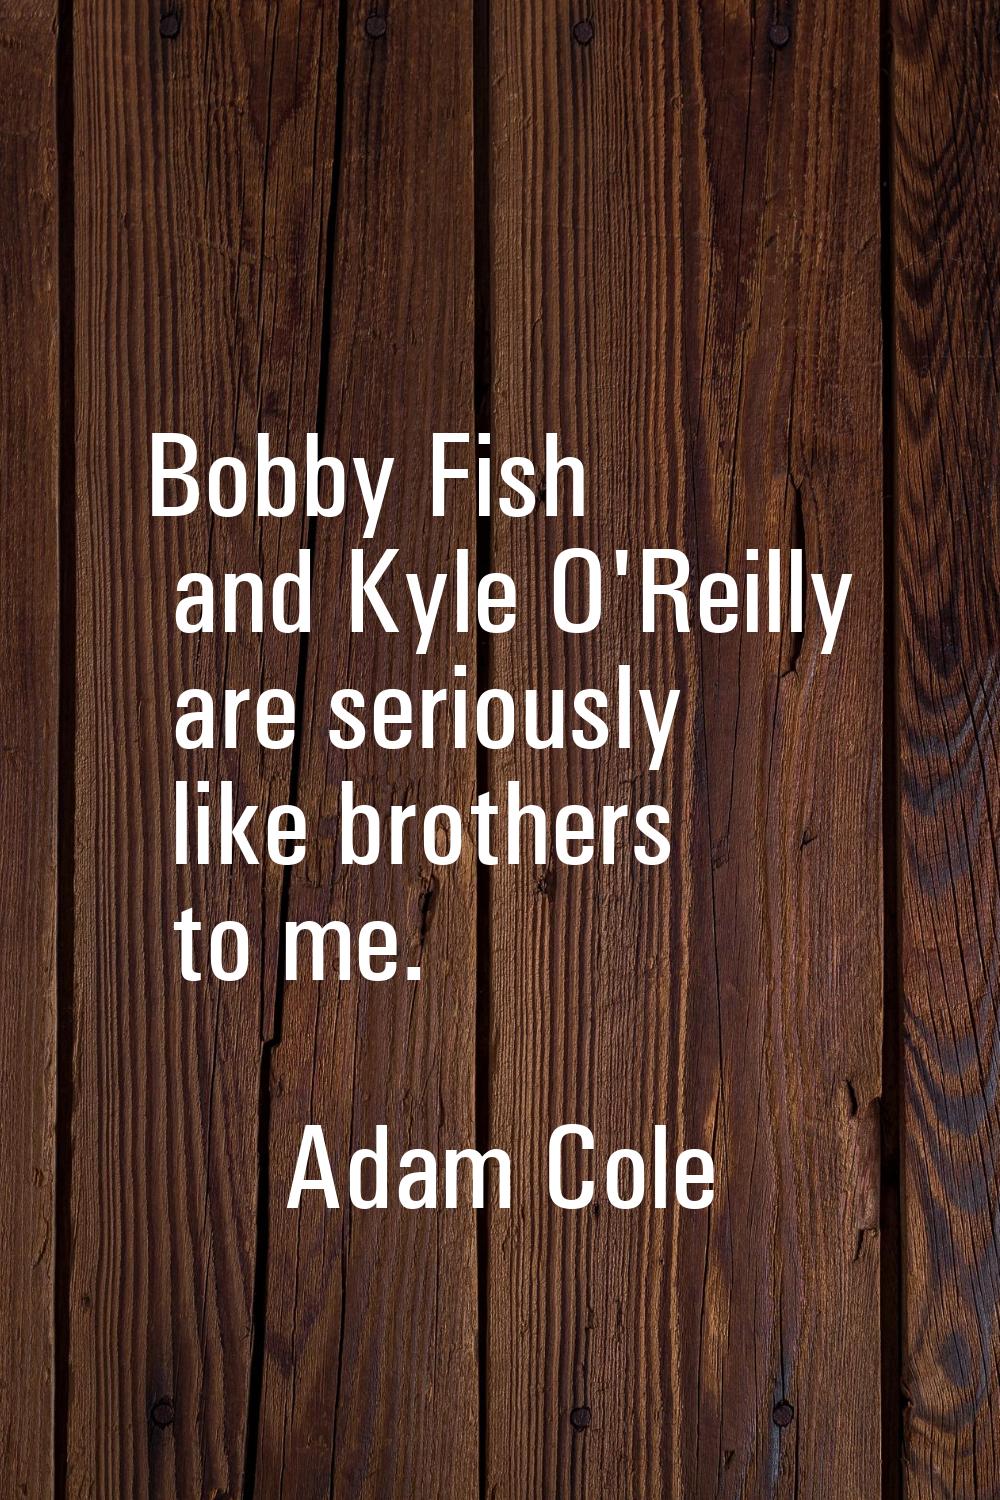 Bobby Fish and Kyle O'Reilly are seriously like brothers to me.